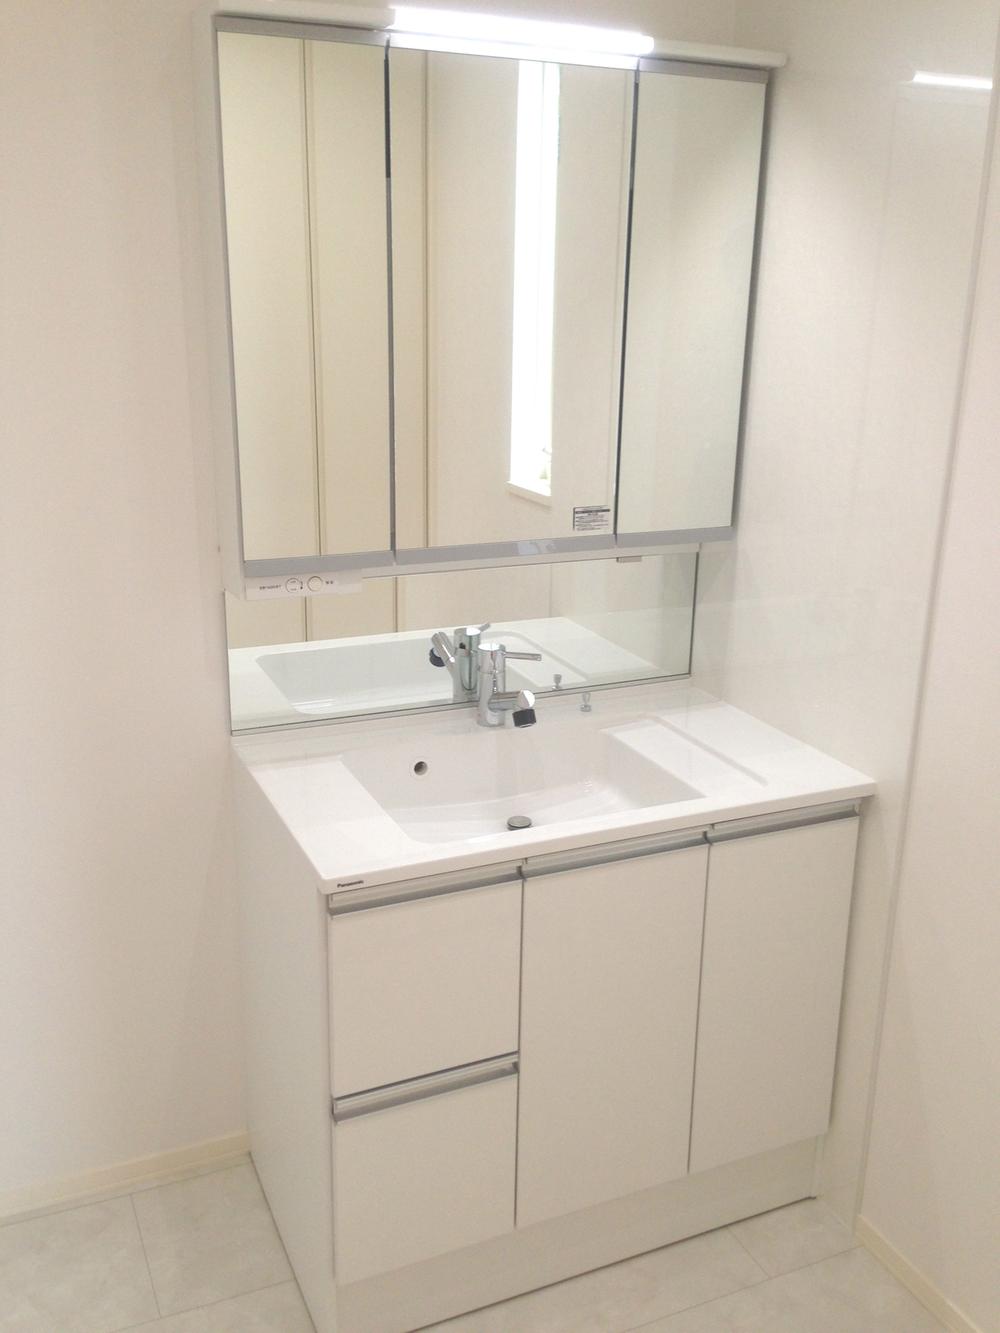 Wash basin, toilet. It is the washstand of the three-sided mirror. Water washing is the shampoo dresser type that previously extended. (277 No. land)